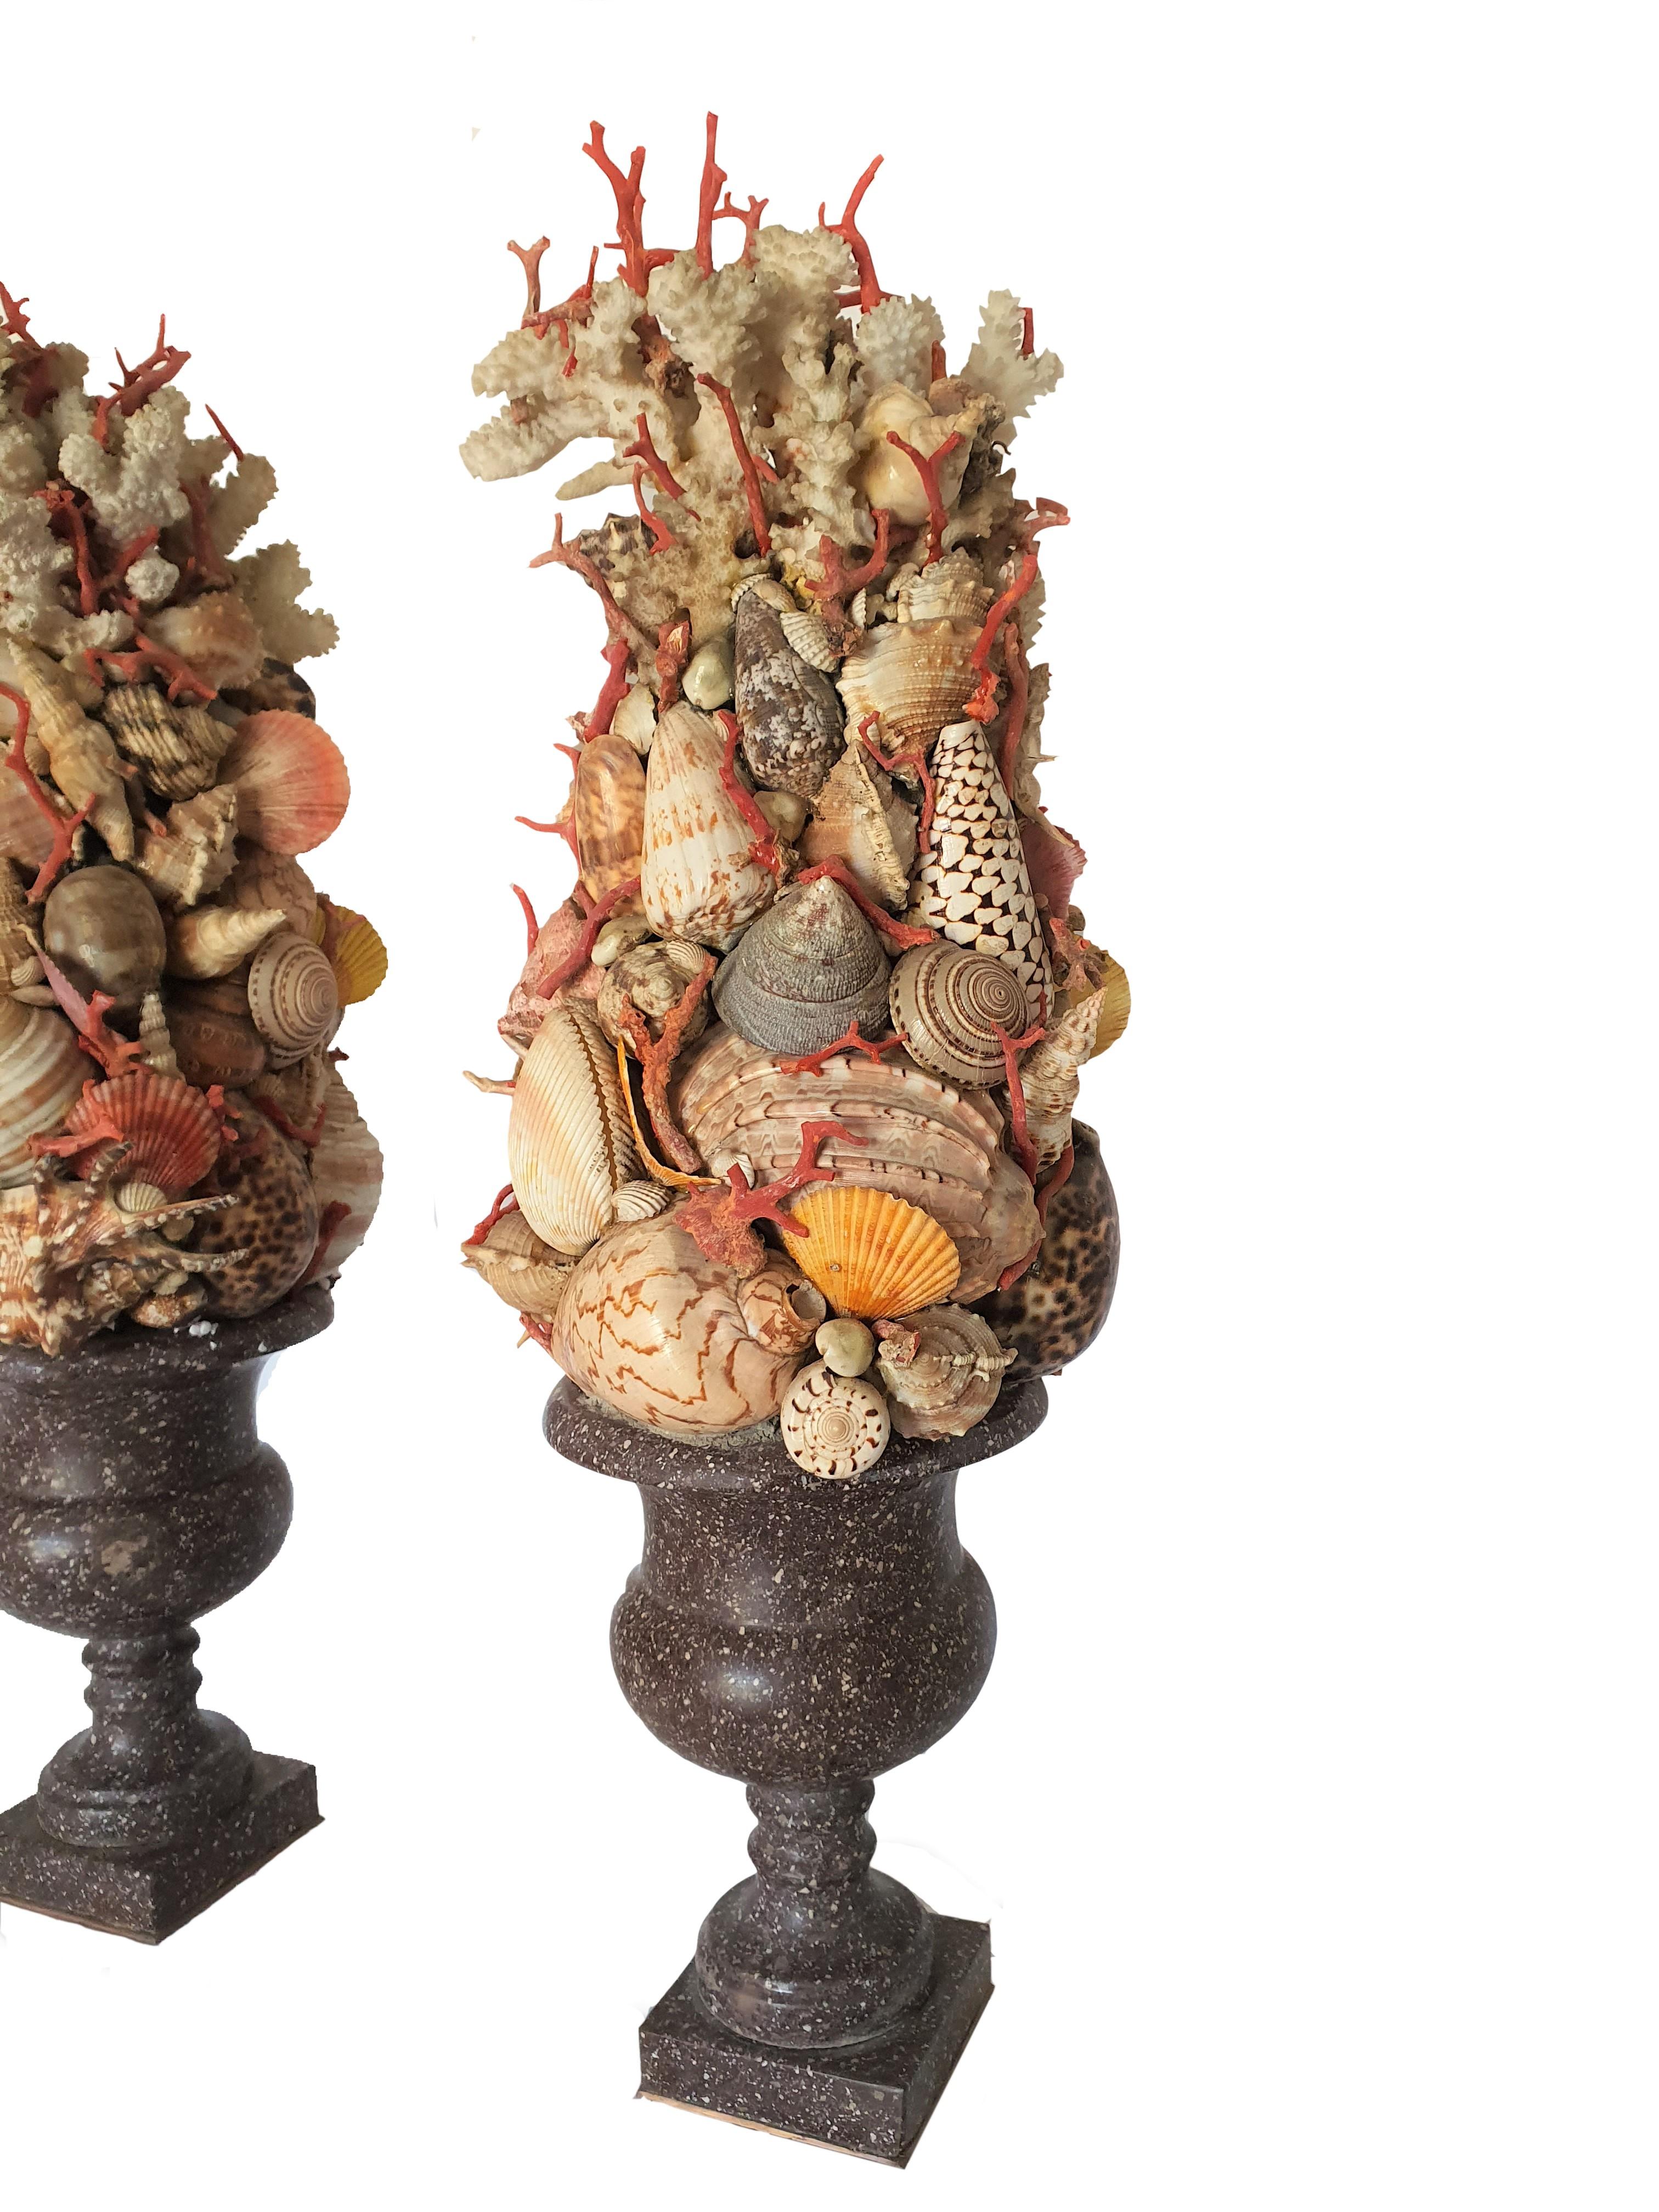 Particular pair of Egyptian porphyry vases. Seashells and applications in Trapani coral adorn the upper part of the vases.